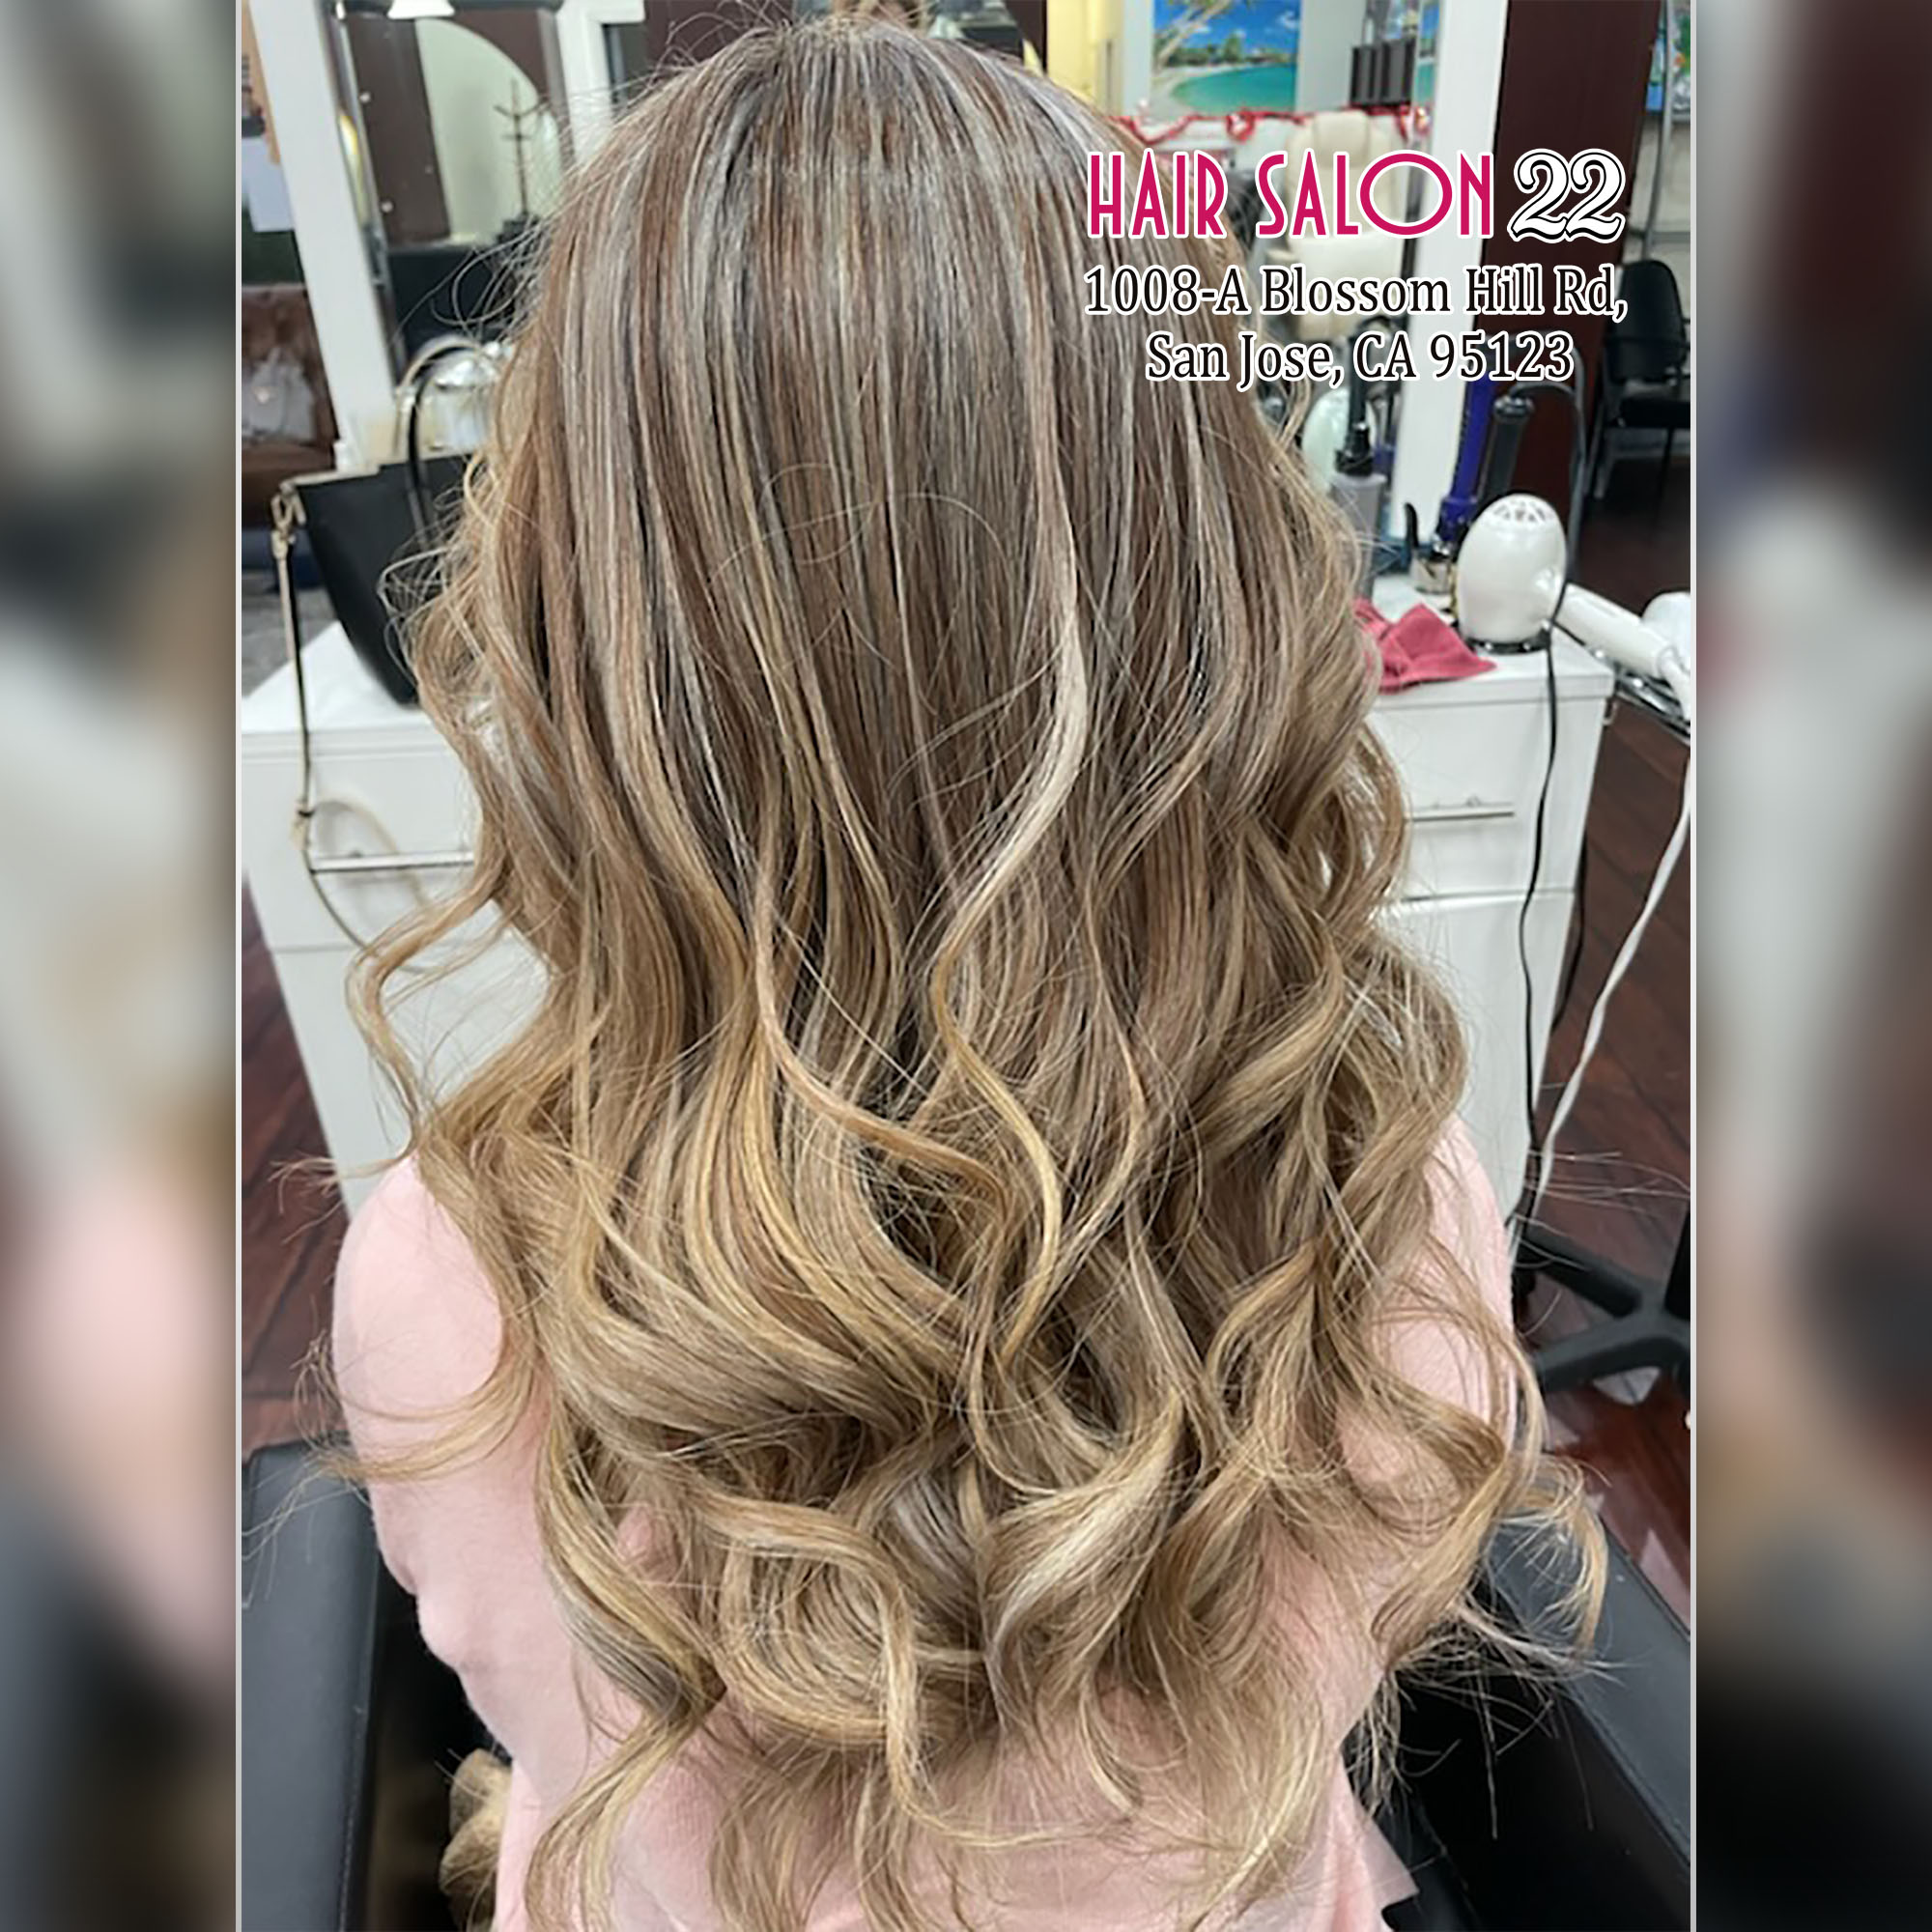 15+ Curly Hairstyle | New Trend 2023 | Hair Salon 22 – Top 10 Nail Salon in  USA